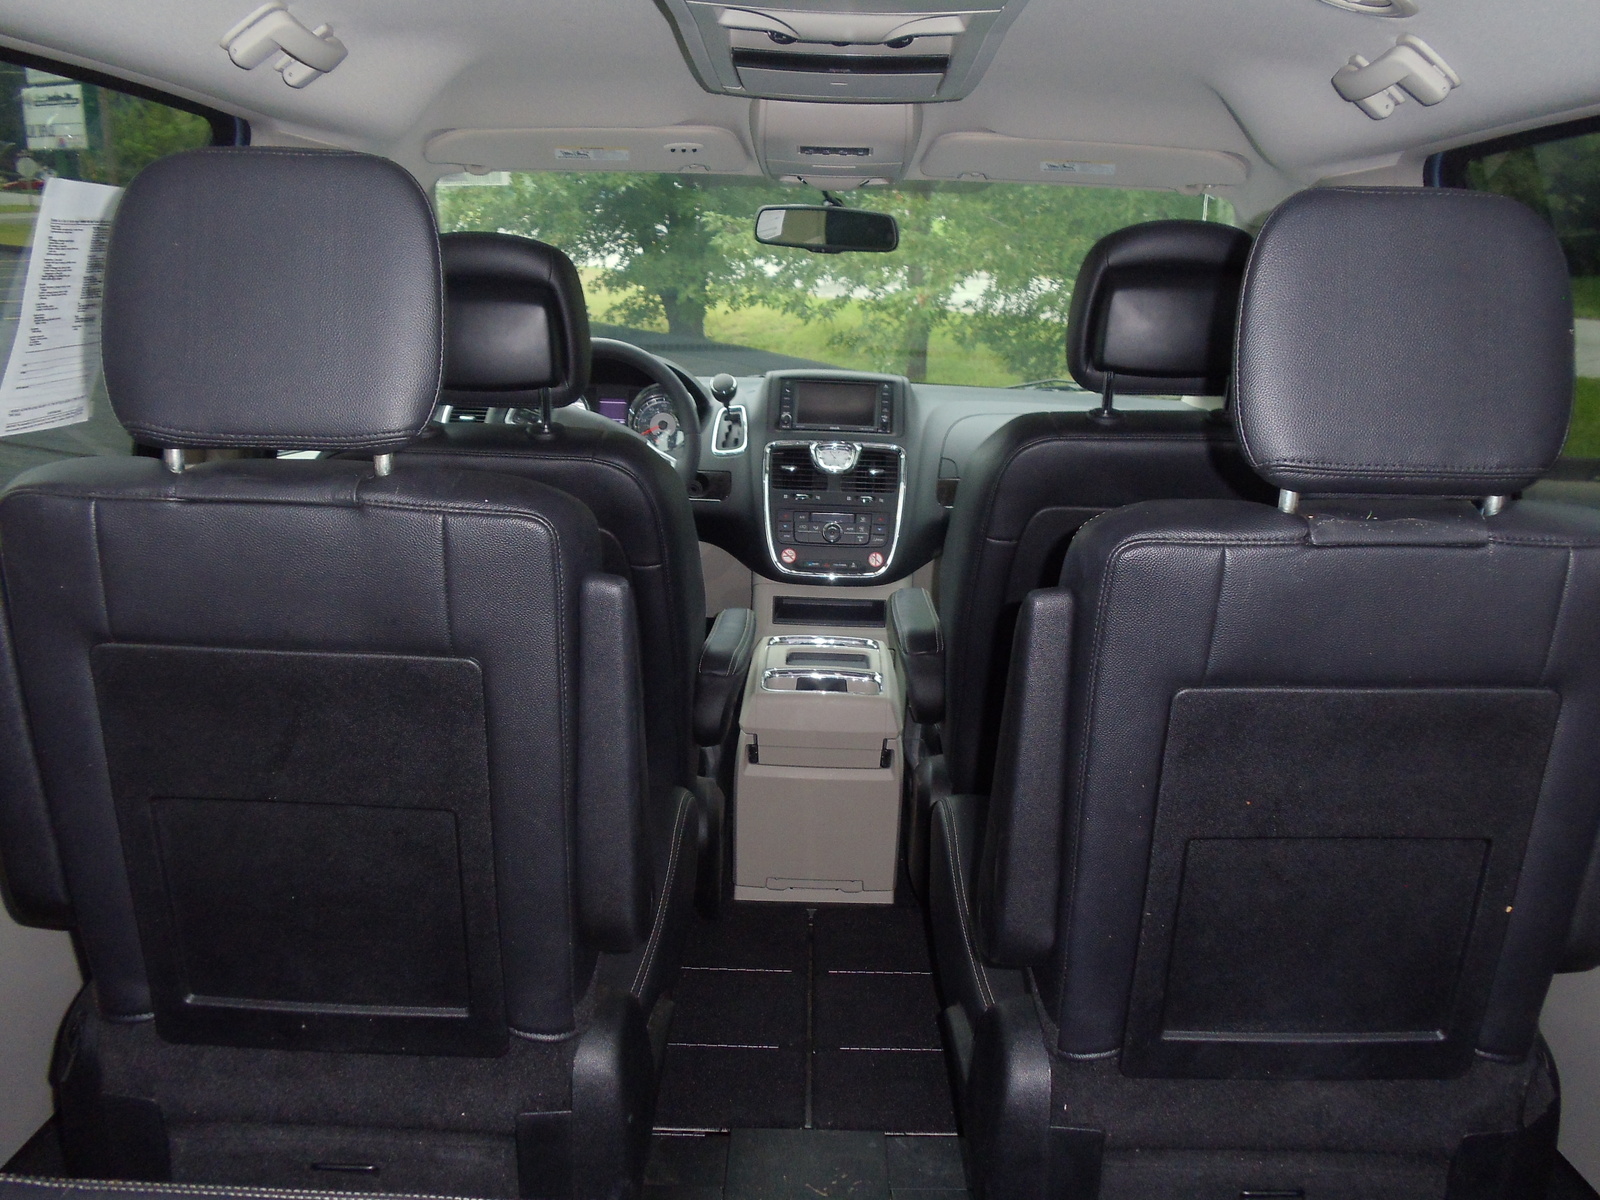 2013 Chrysler Town & Country - Pictures - CarGurus